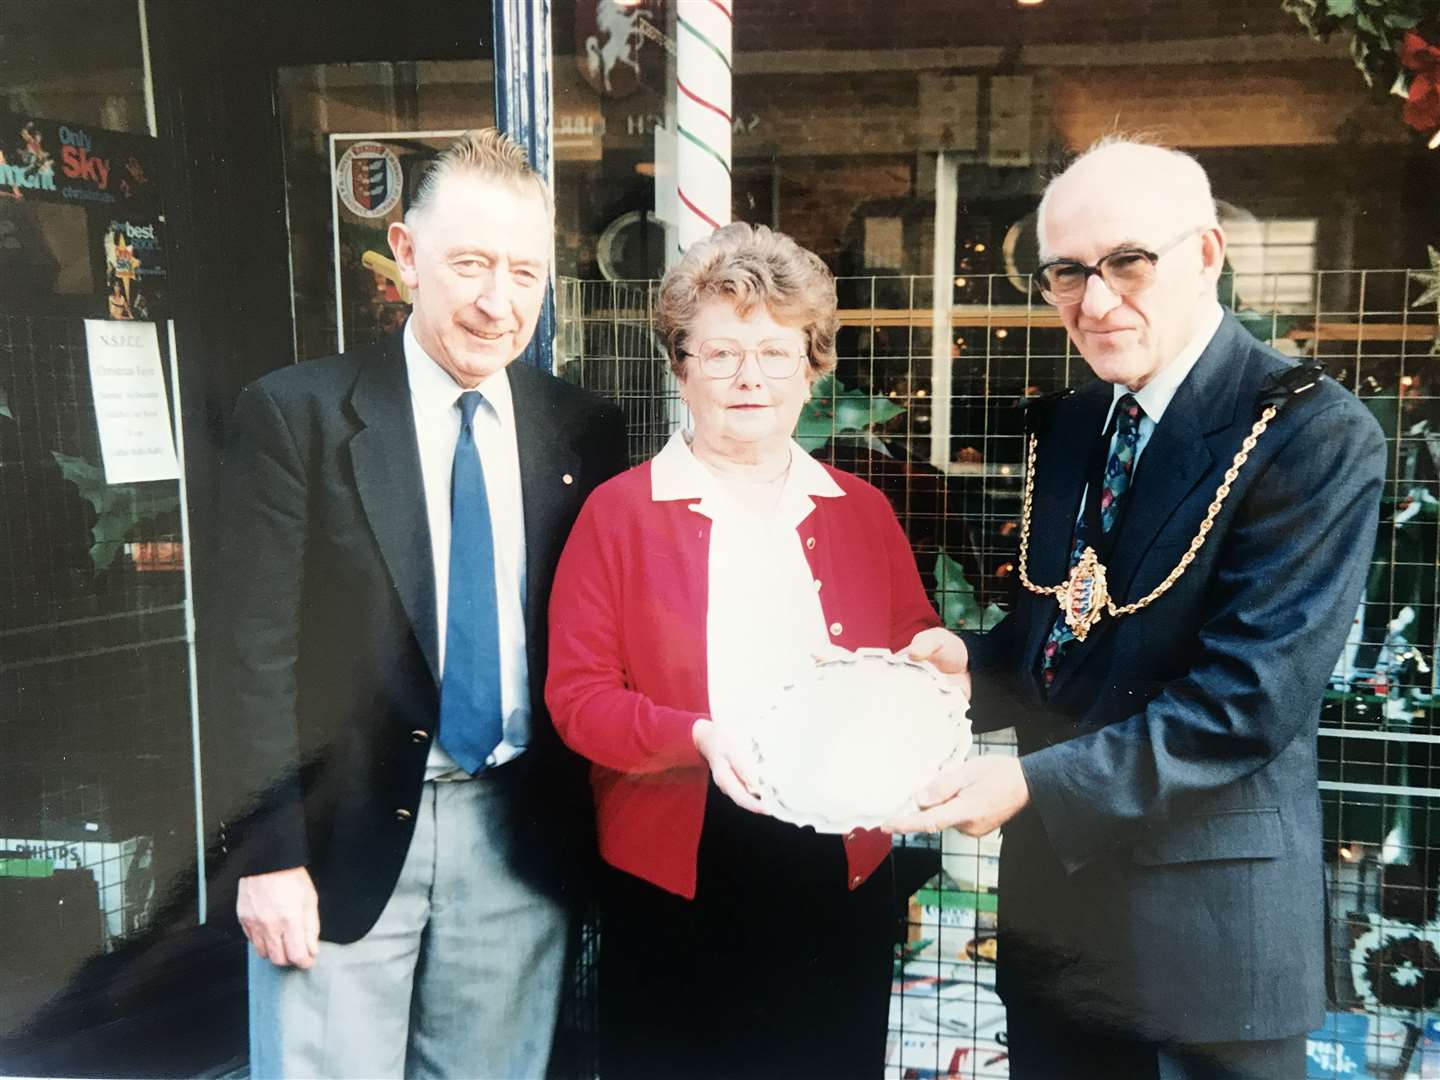 Jim and Audrey Wyman were awarded for their window display by the town council in 1994